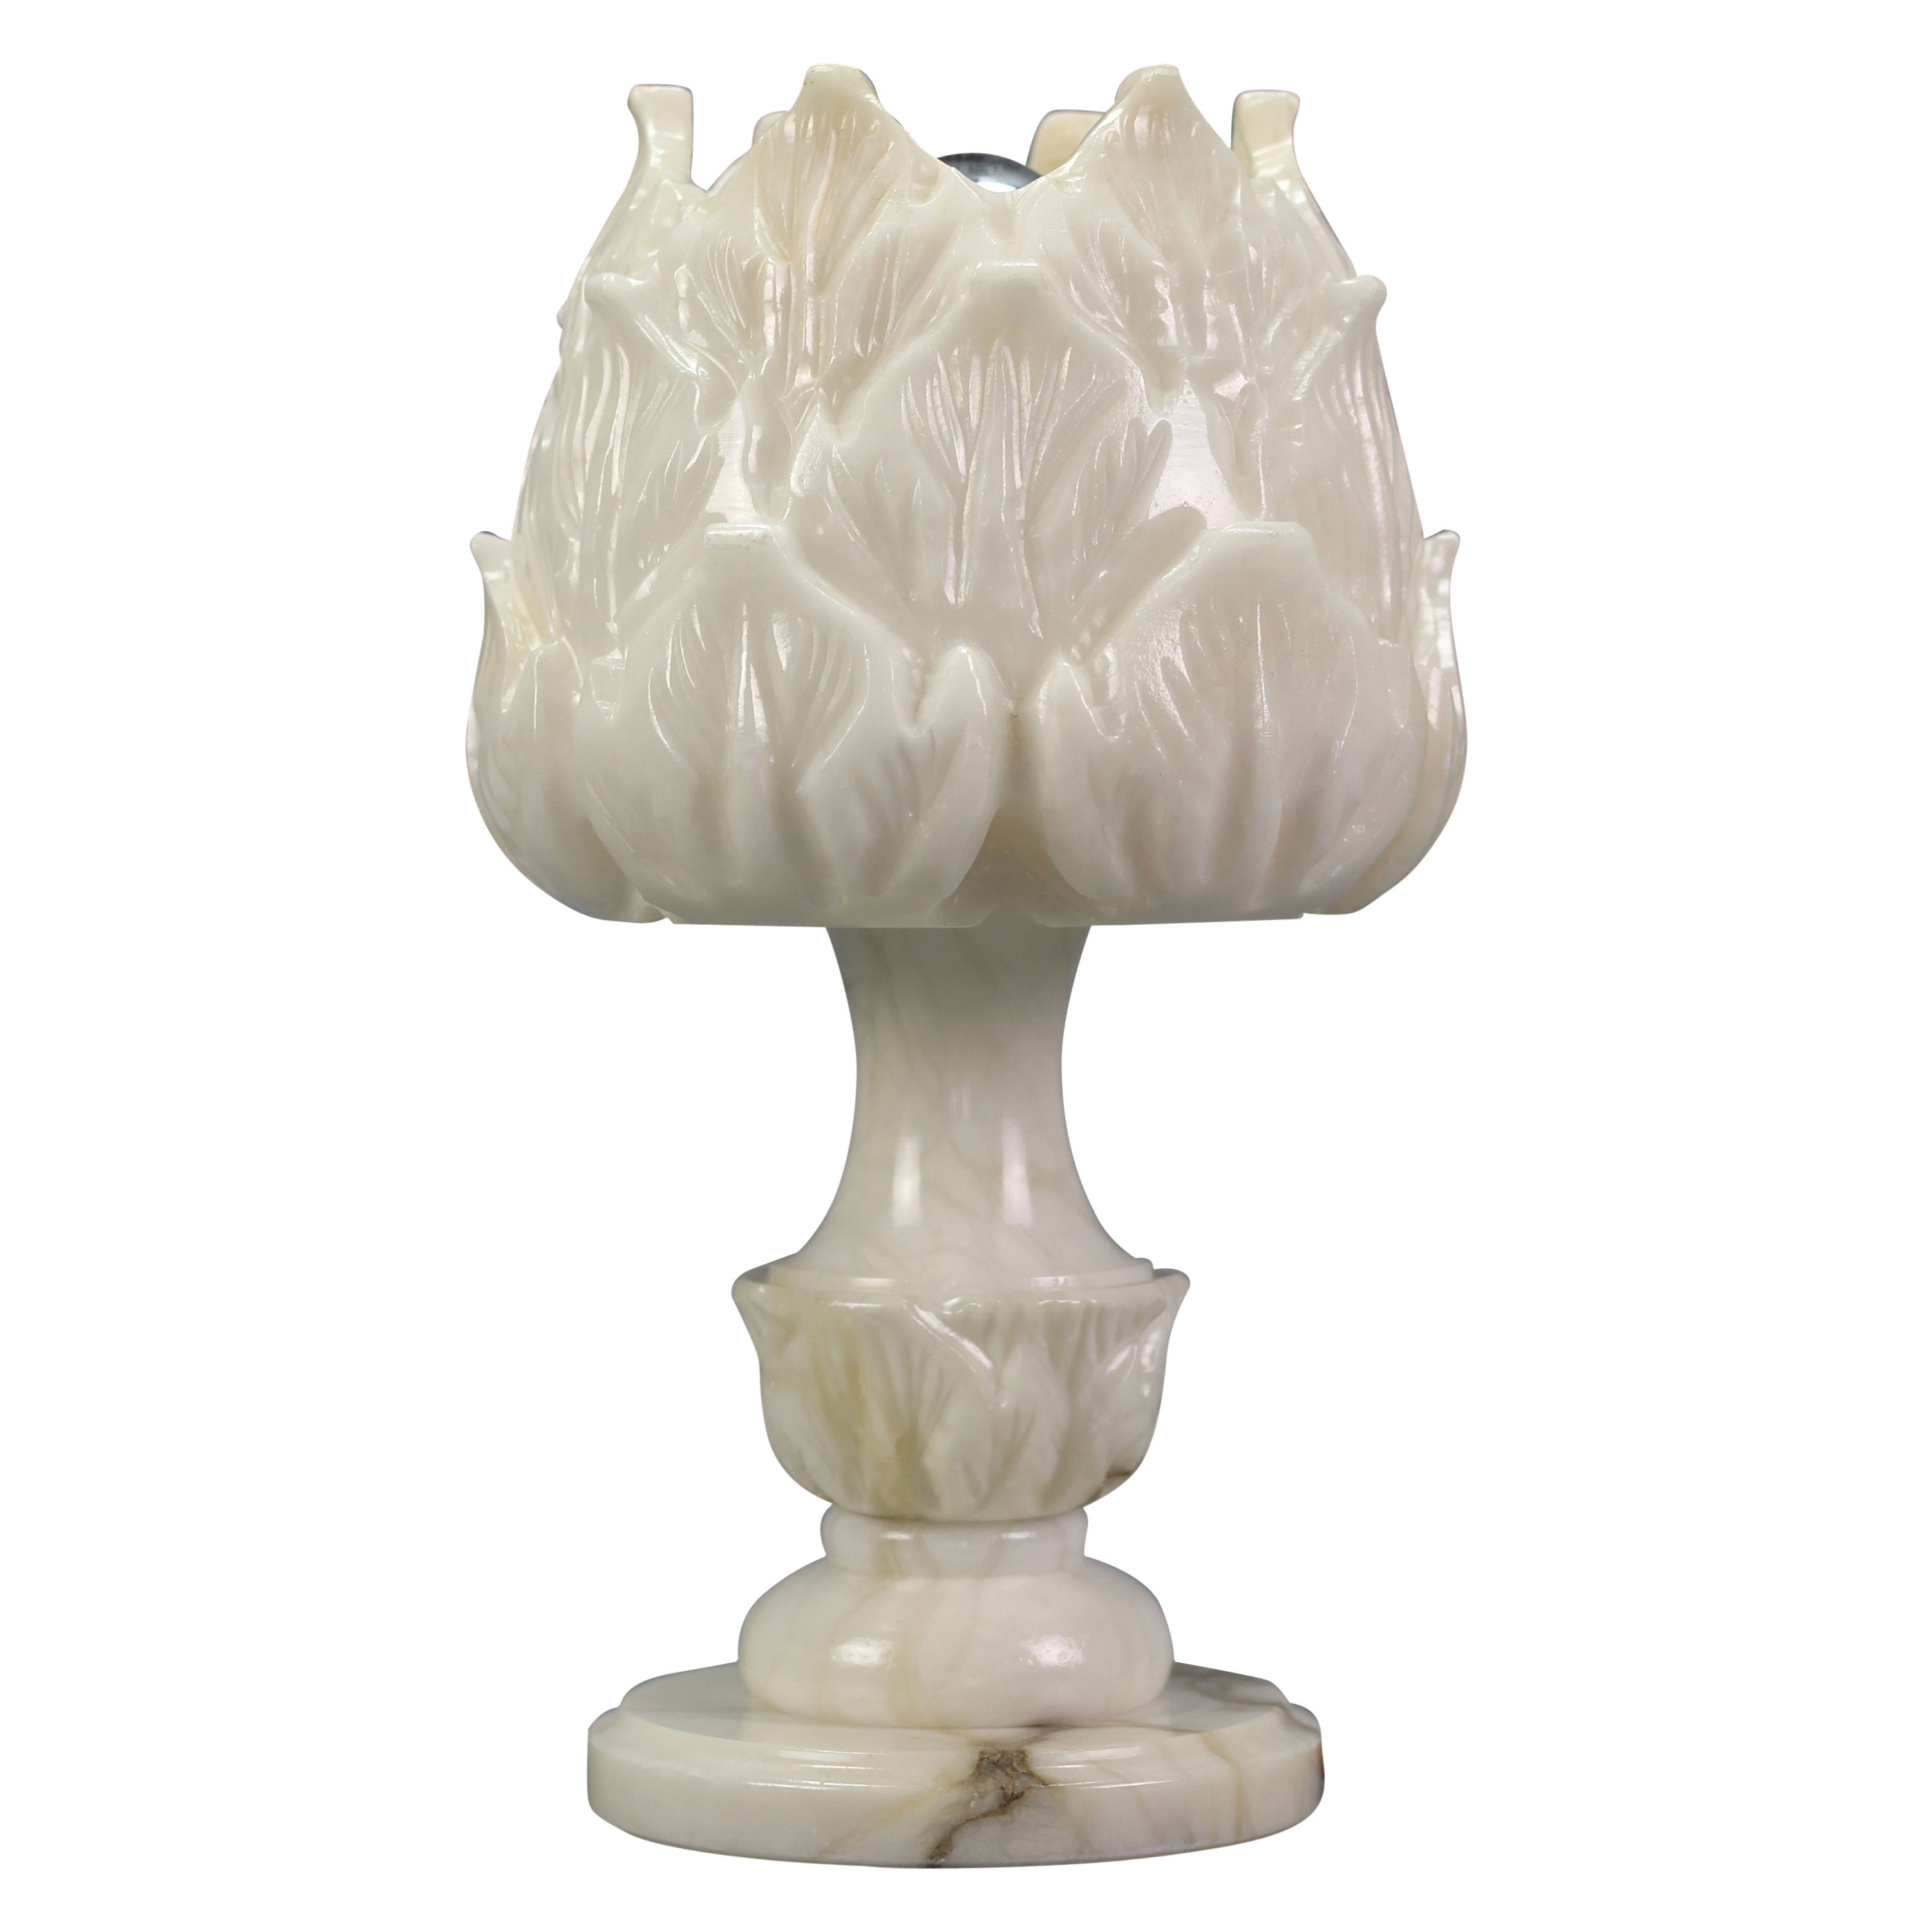 Italian Mid-Century Flower-Shaped White Alabaster Table Lamp or Mood Lamp, 1950s